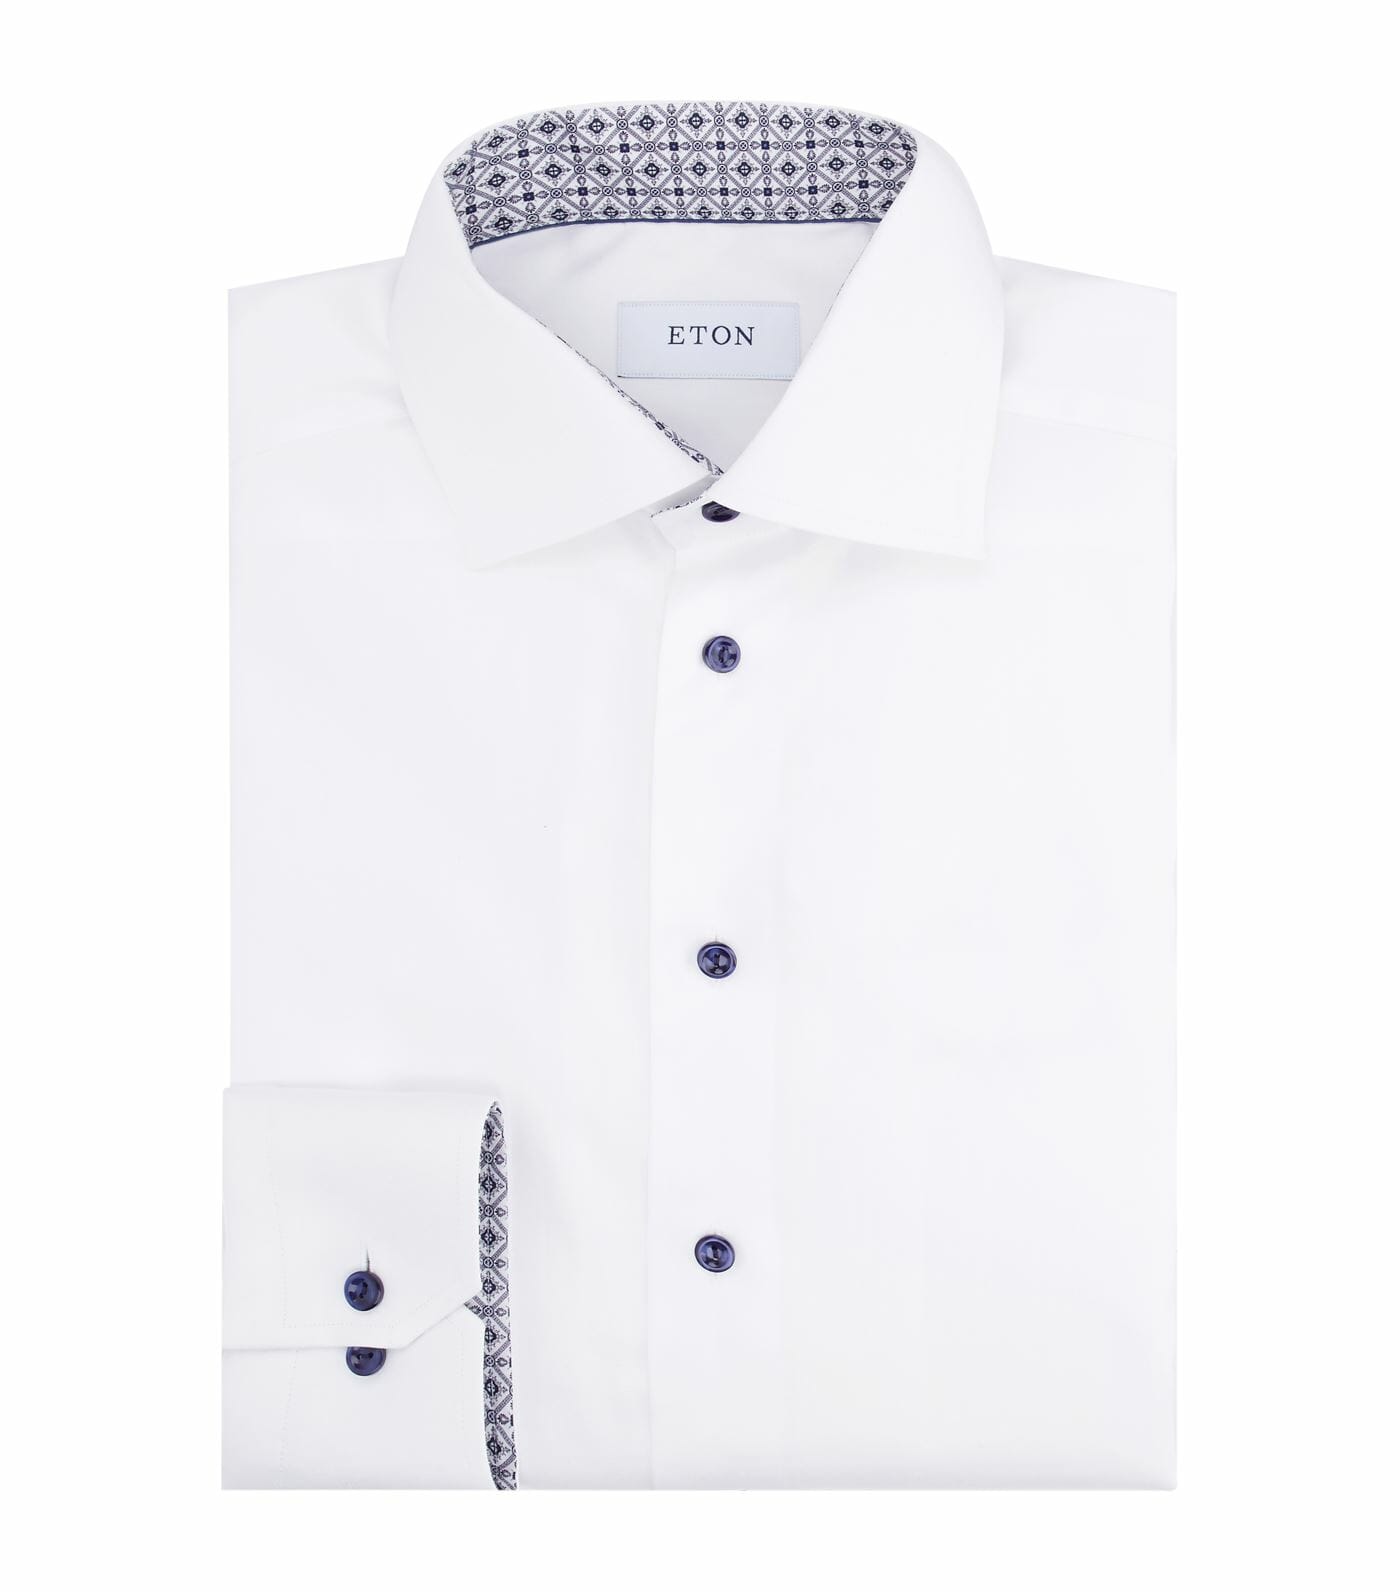 White Eton shirt with blue buttons